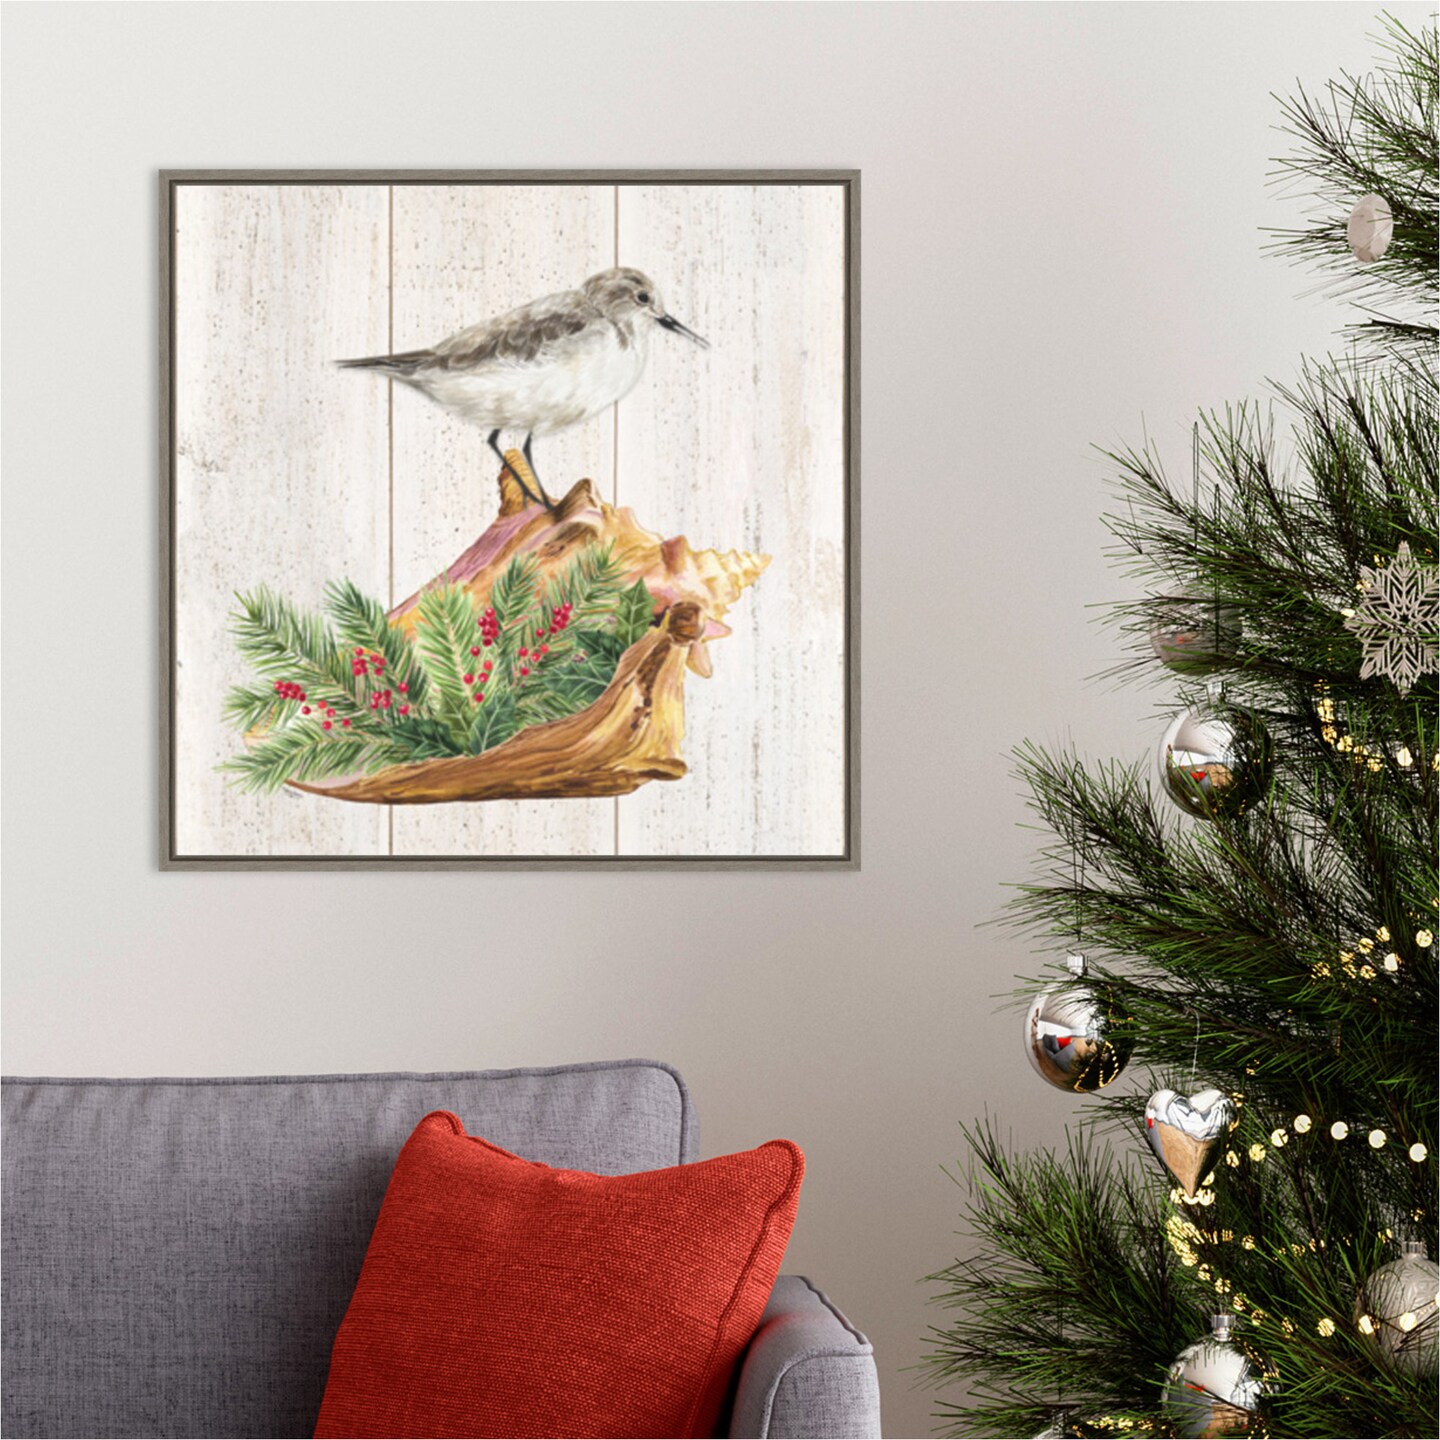 Christmas on the Coast III by Tara Reed 22-in. W x 22-in. H. Canvas Wall Art Print Framed in Grey